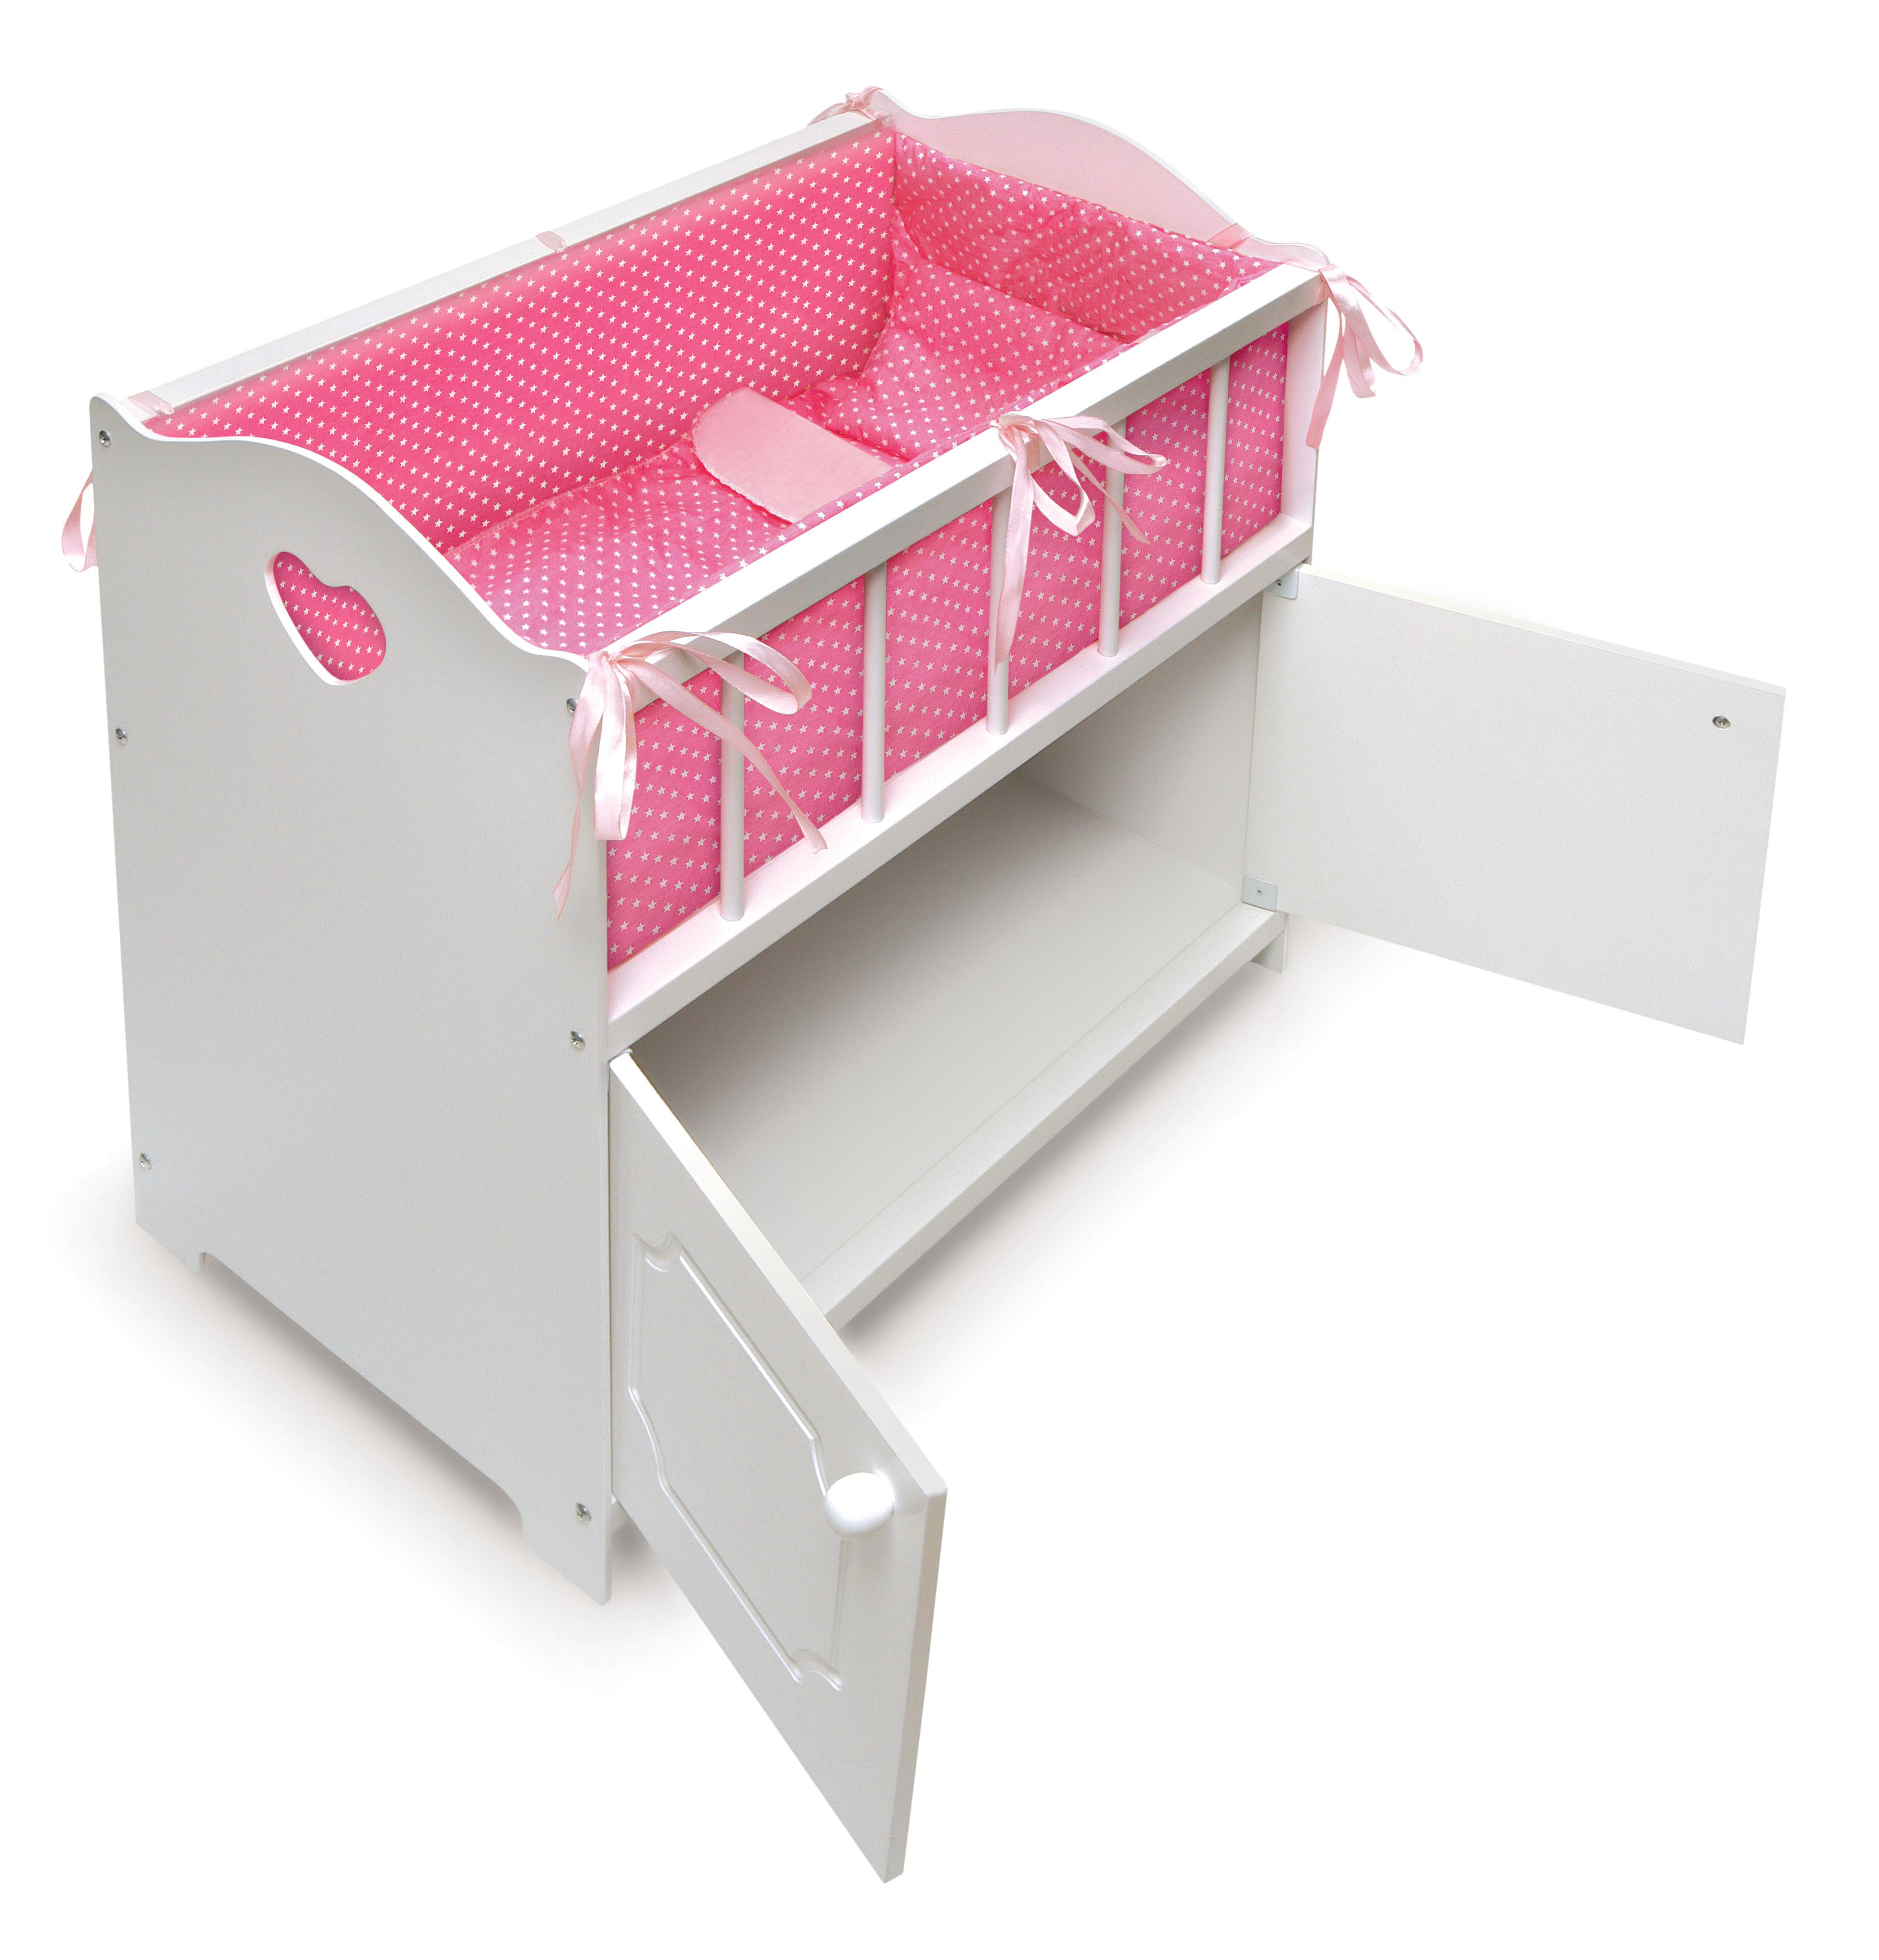 White Baby Doll Crib Accessory For Dolls Up To 20 Featuring A Padded Liner  With Pillow Set & 2 Removable Baskets That Provide Plenty Of Storage